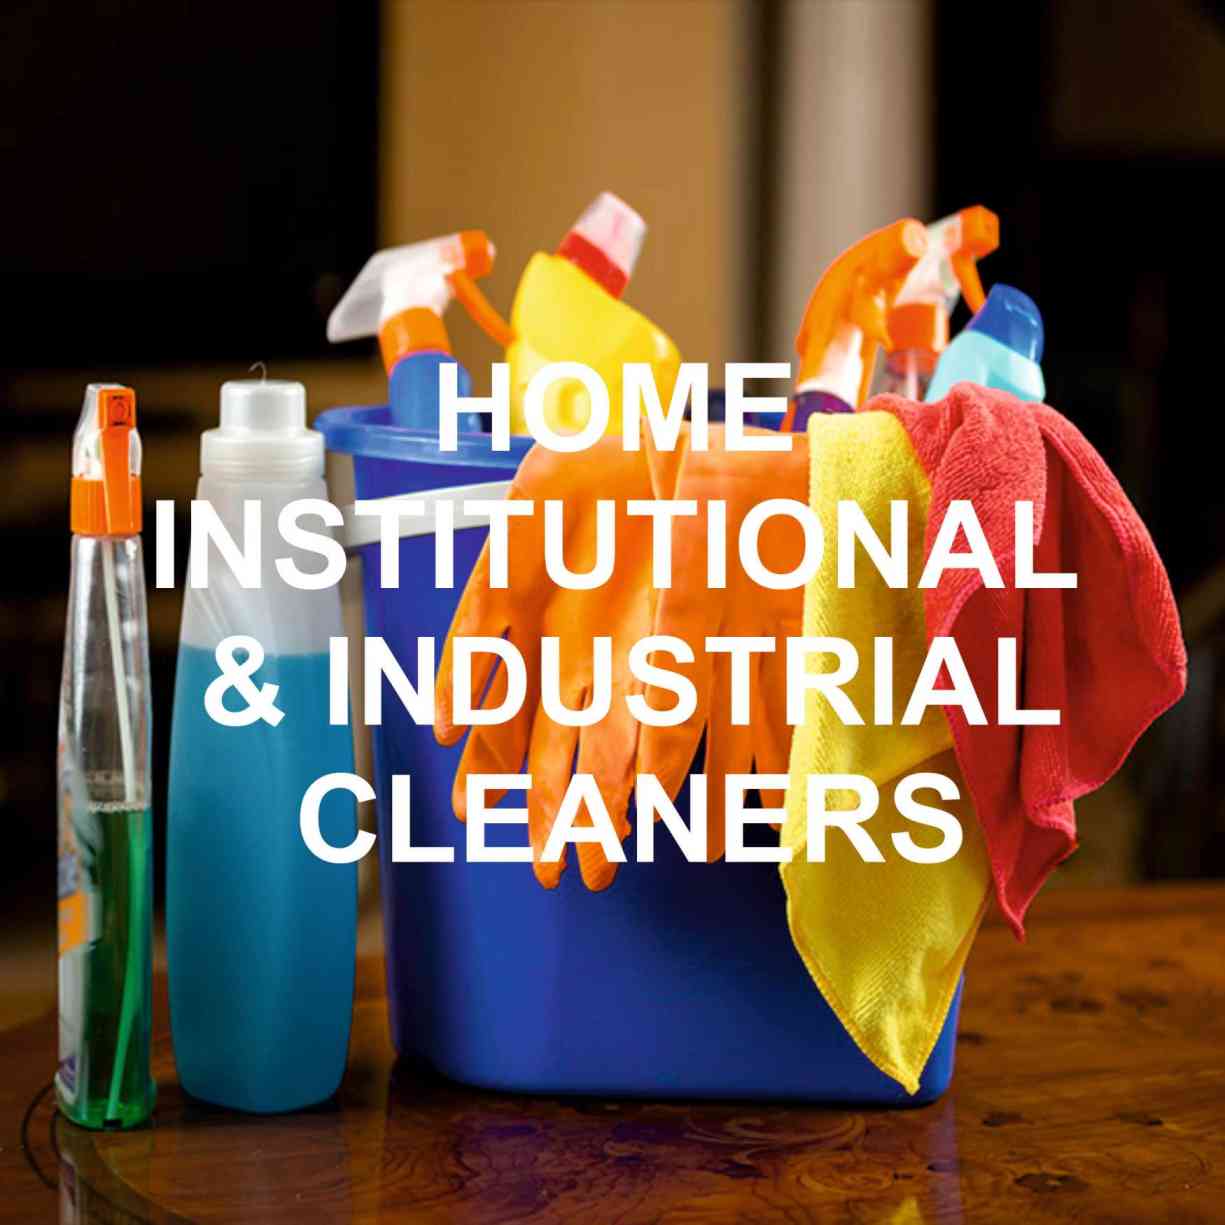 Homecare chemicals